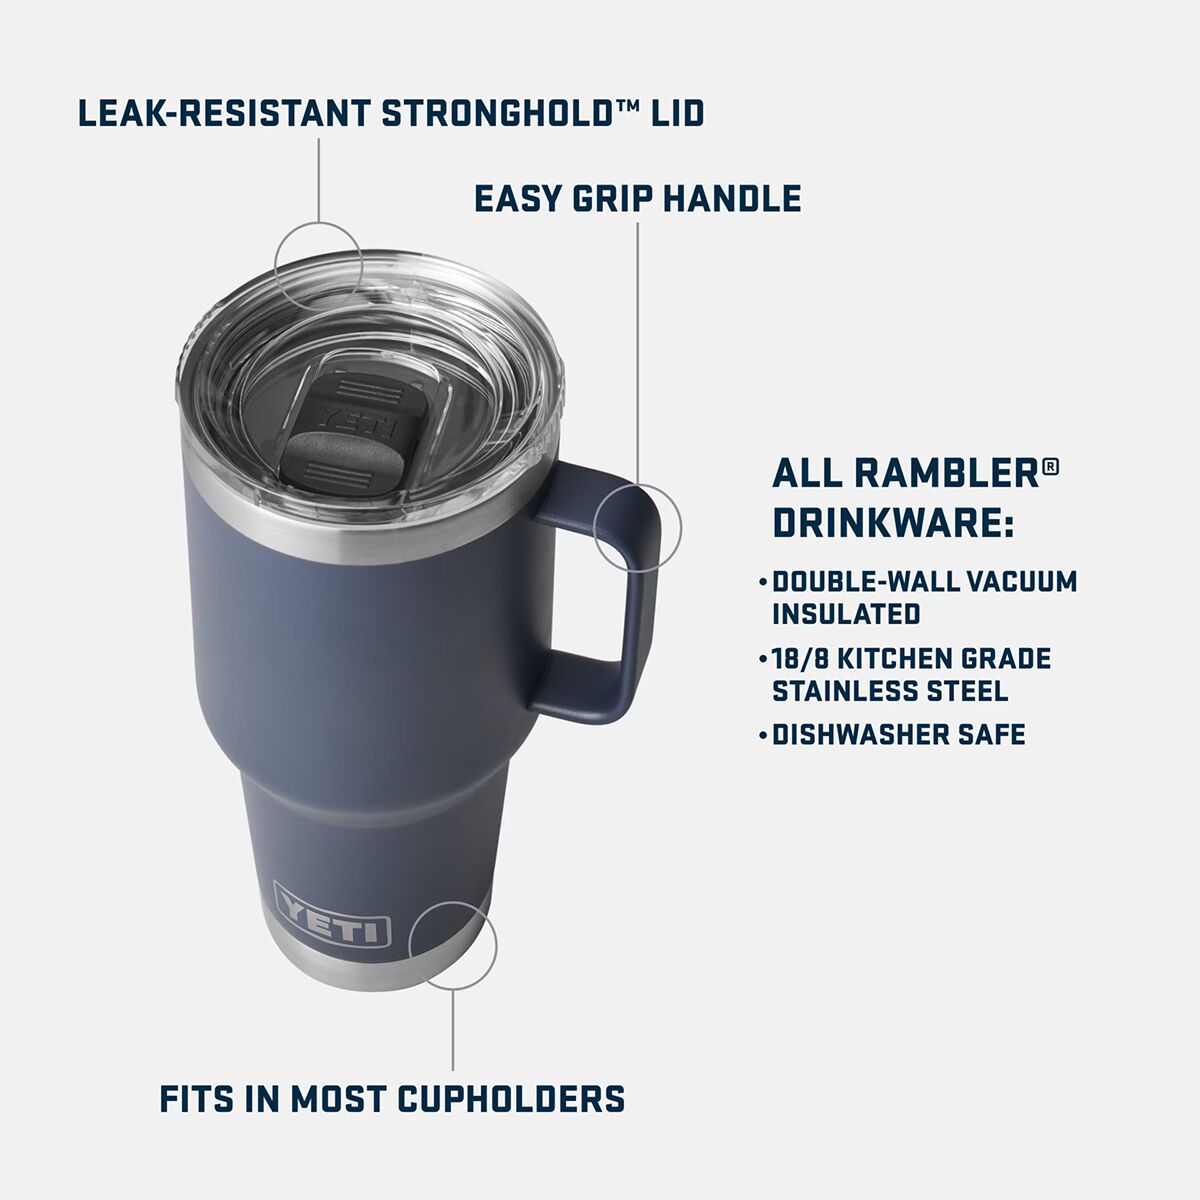 Handle For 30oz Stainless Steel Yeti Rambler Insulated Tumbler Mug Coffee  Cup 30oz Cup Handle Beer Cup Beer 